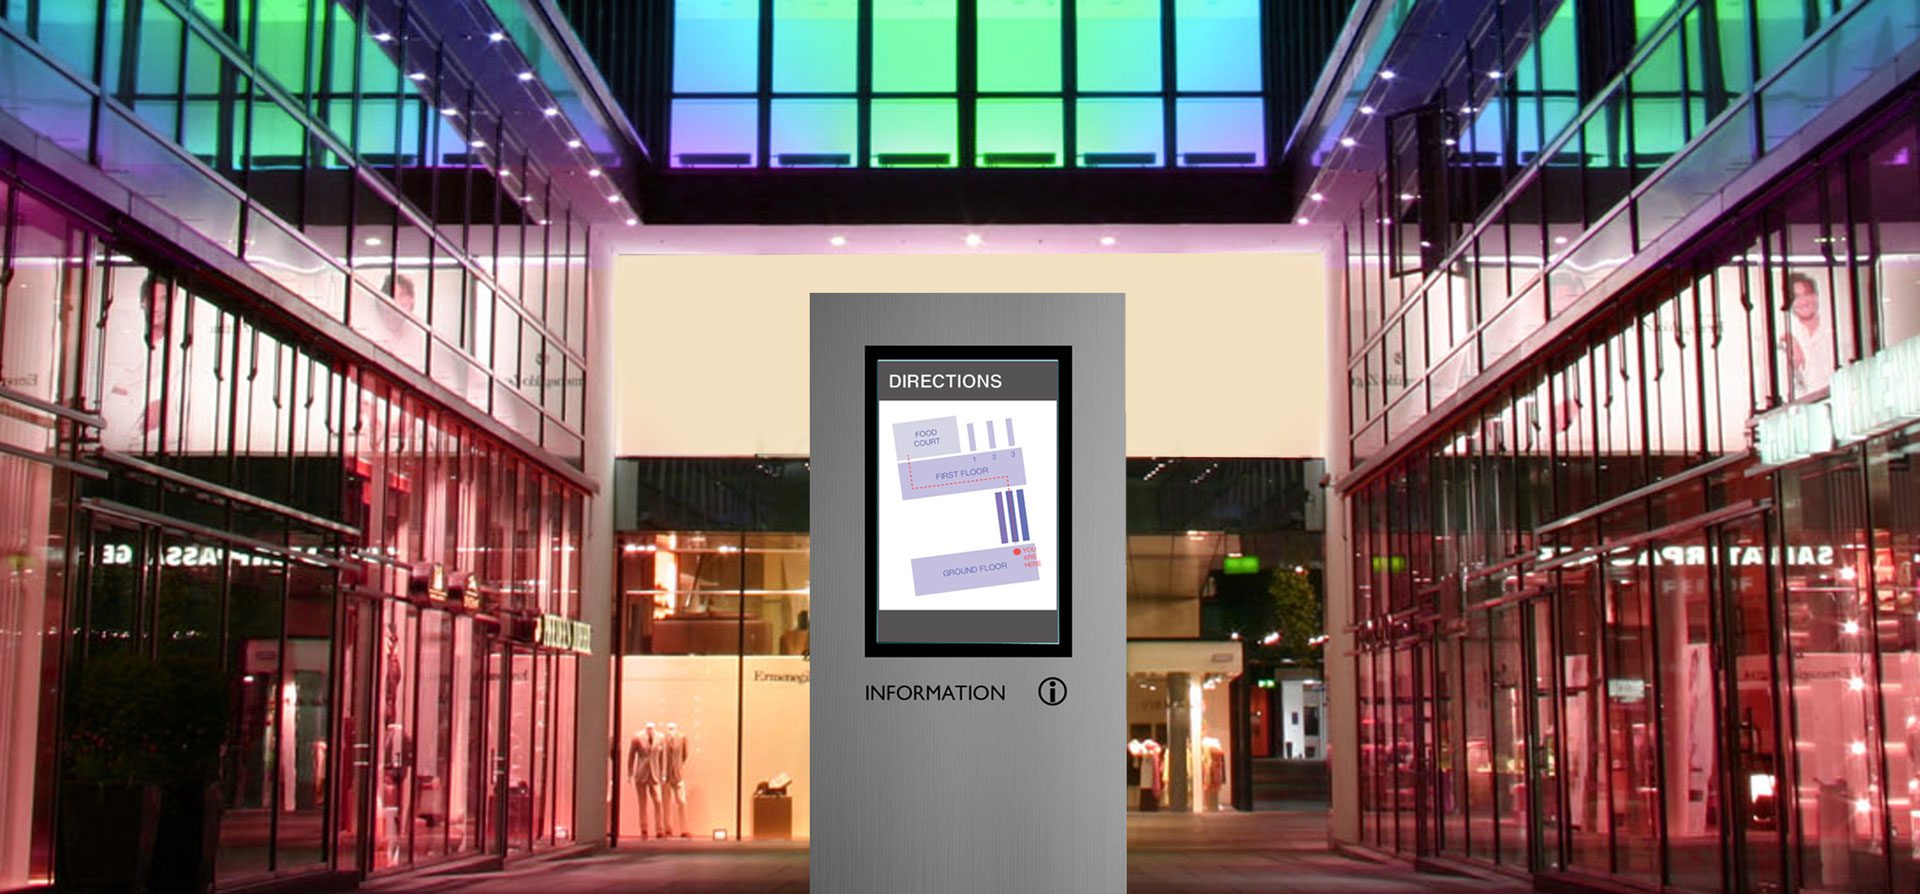 digital signage display systems for retail